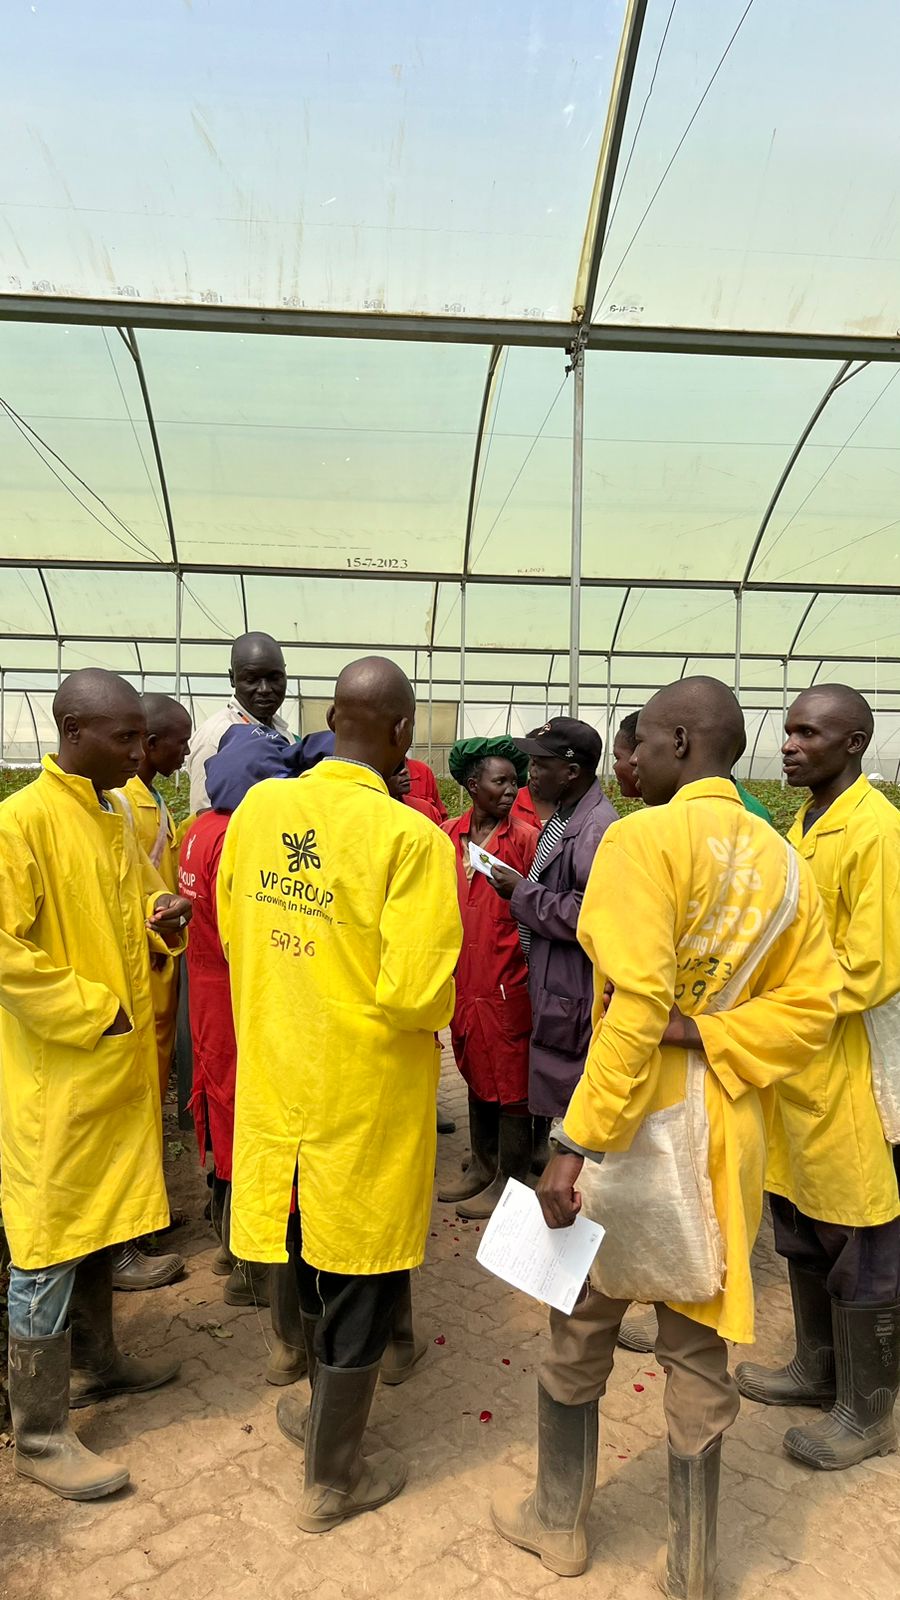 a group of people in yellow coats in a greenhouse